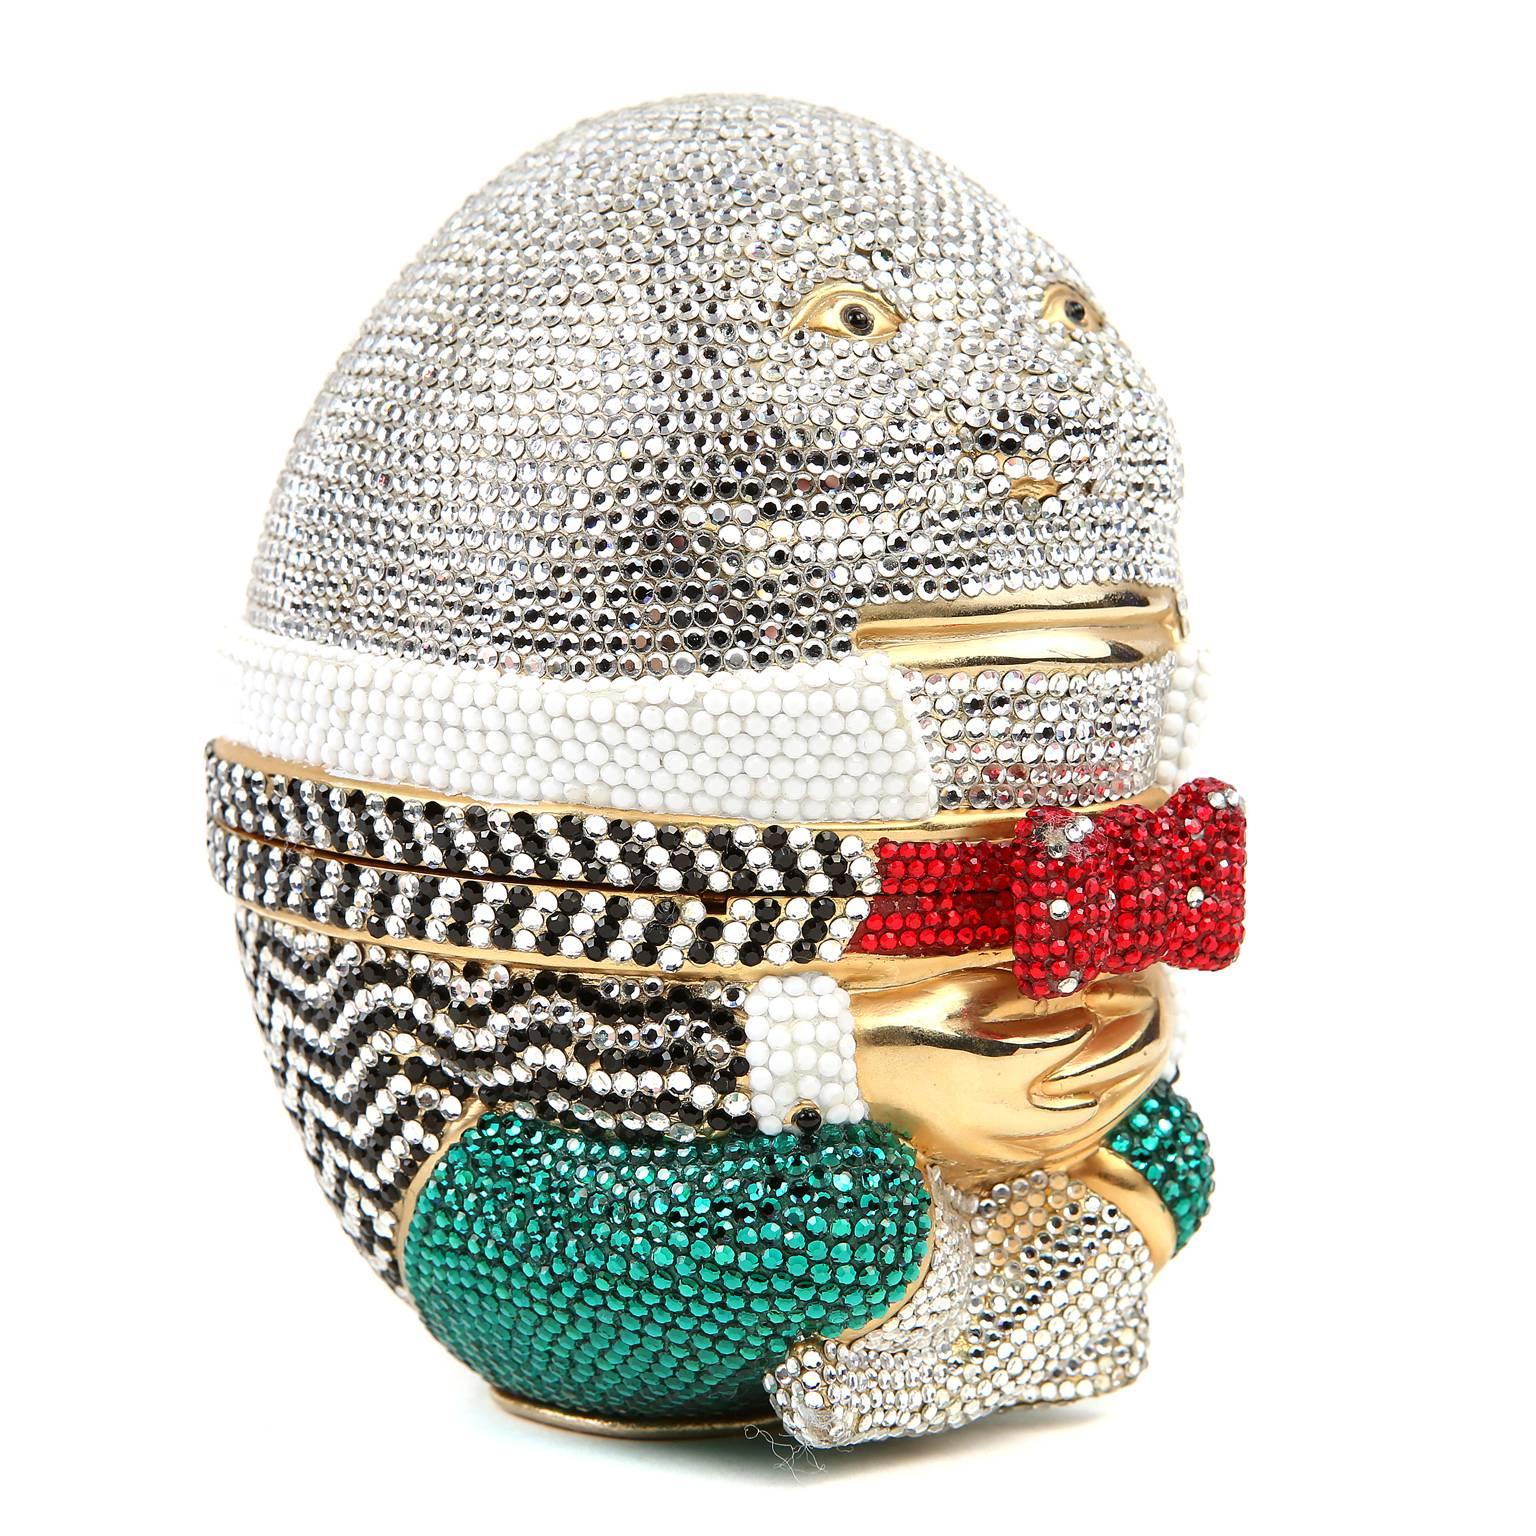 Judith Leiber Humpty Dumpty Minaudiere- Mint Condition; Collectible

Green, black, white and red crystals adorn a regal Humpty Dumpty.  Gold hardware and hinged top.  Gold tasseled comb included.
